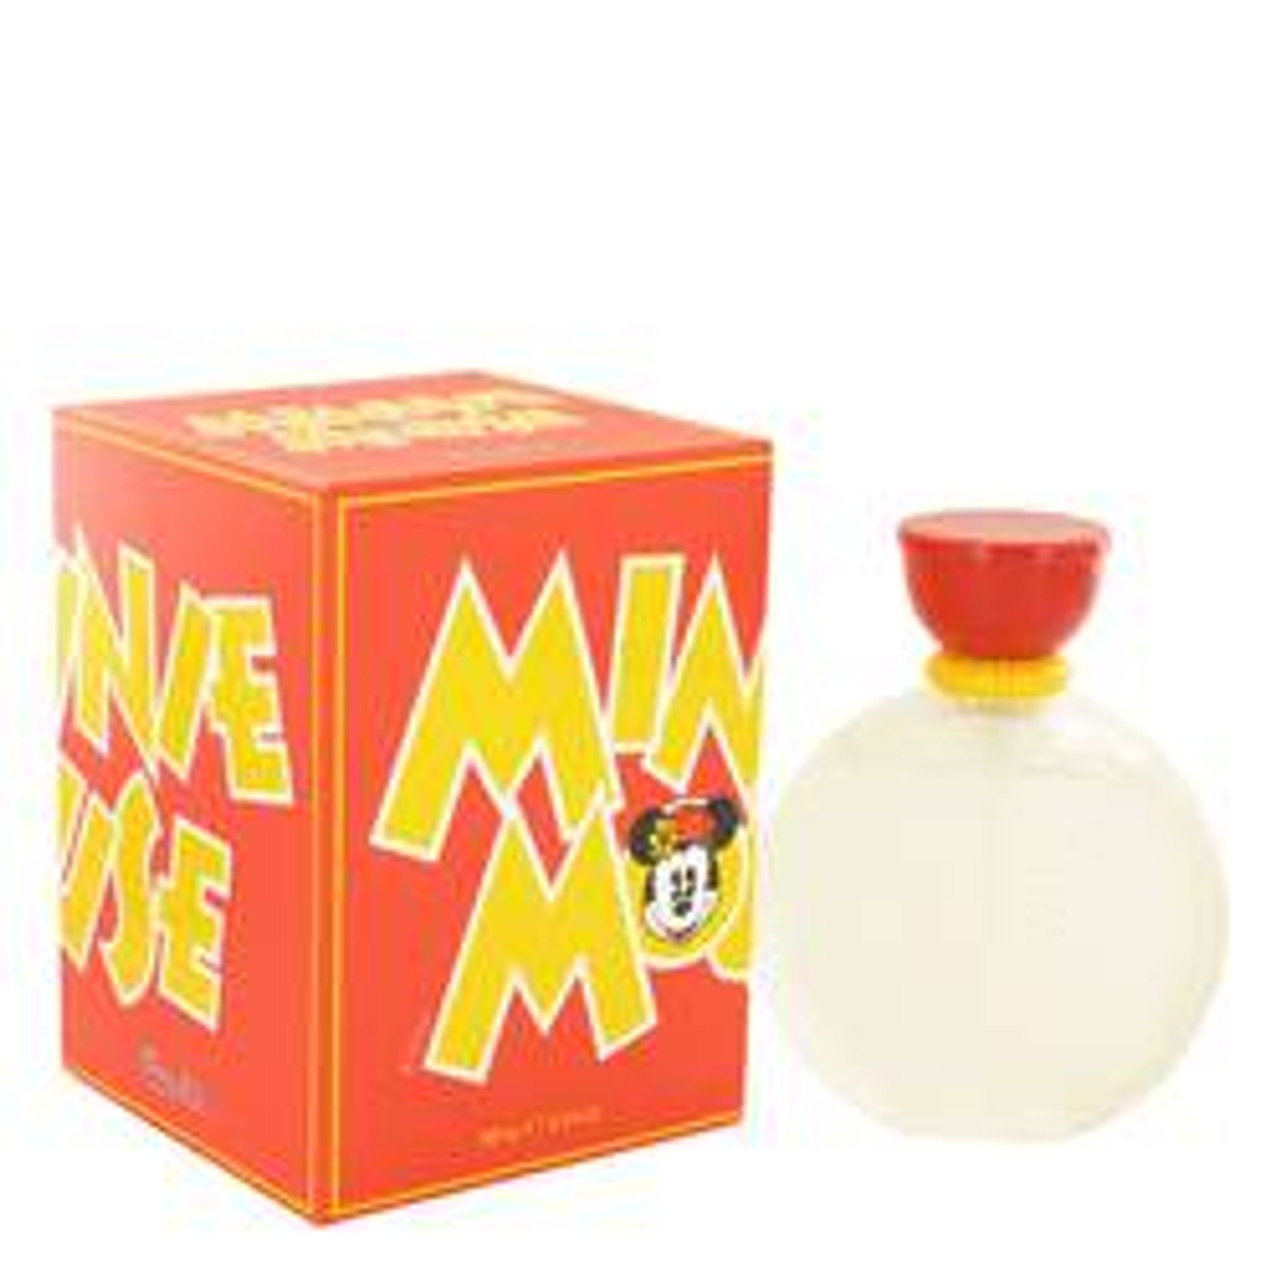 Minnie Mouse Perfume By Disney Eau De Toilette Spray (Packaging may vary) 3.4 oz for Women - [From 27.00 - Choose pk Qty ] - *Ships from Miami